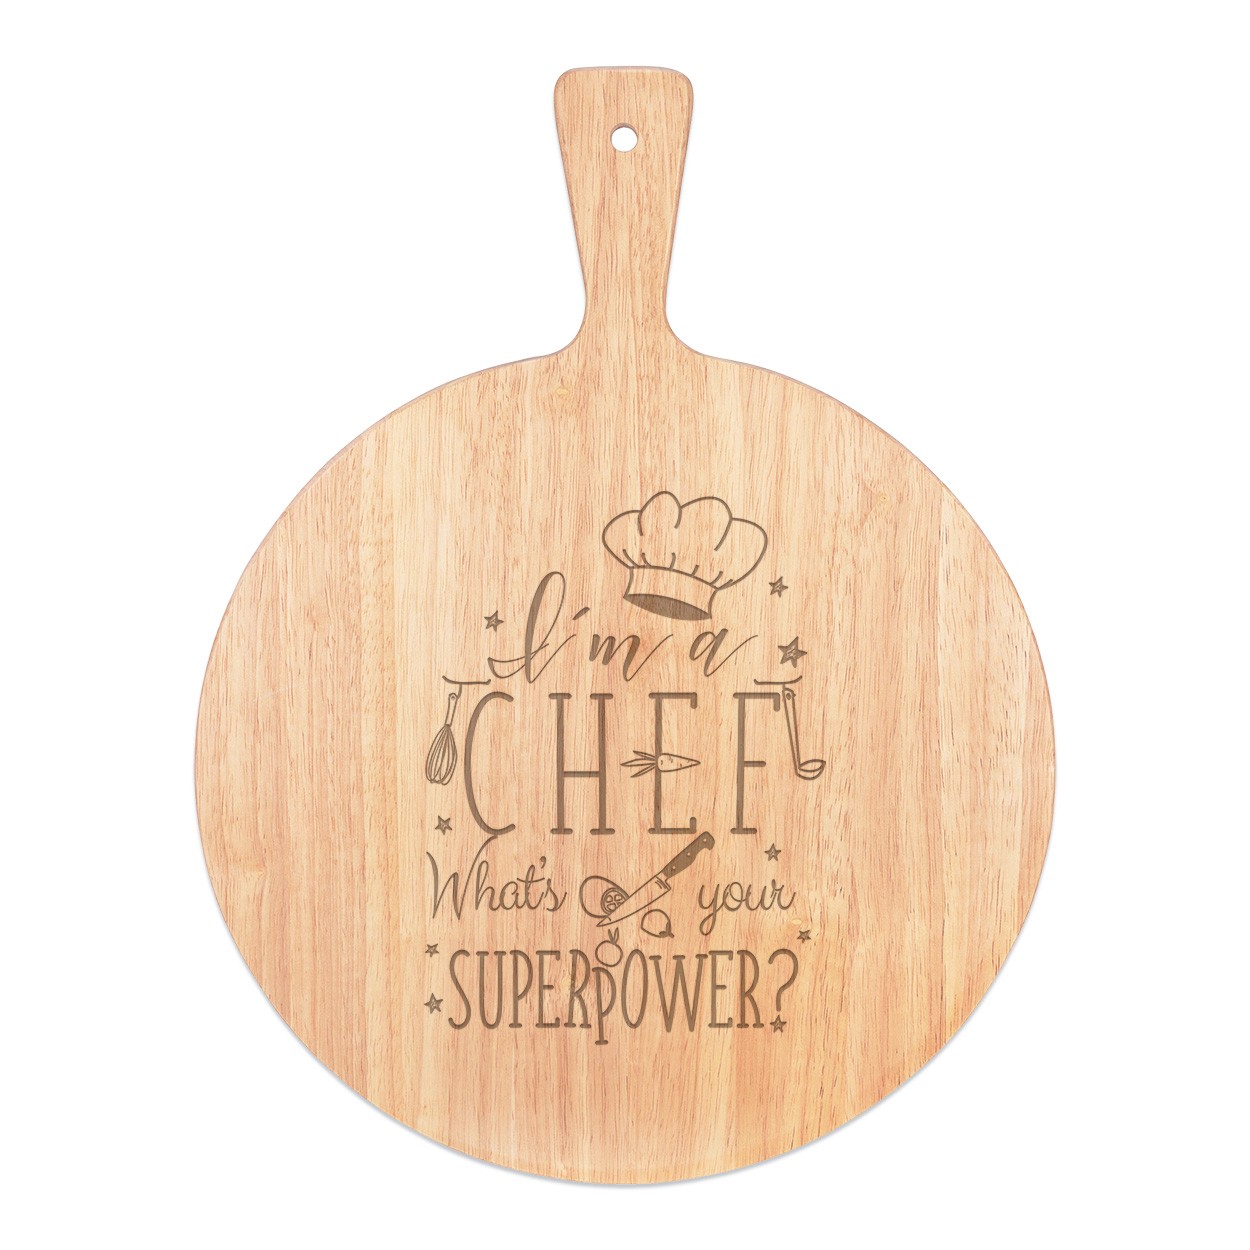 I'm A Chef What's Your Superpower Pizza Board Paddle Serving Tray Handle Round Wooden 45x34cm